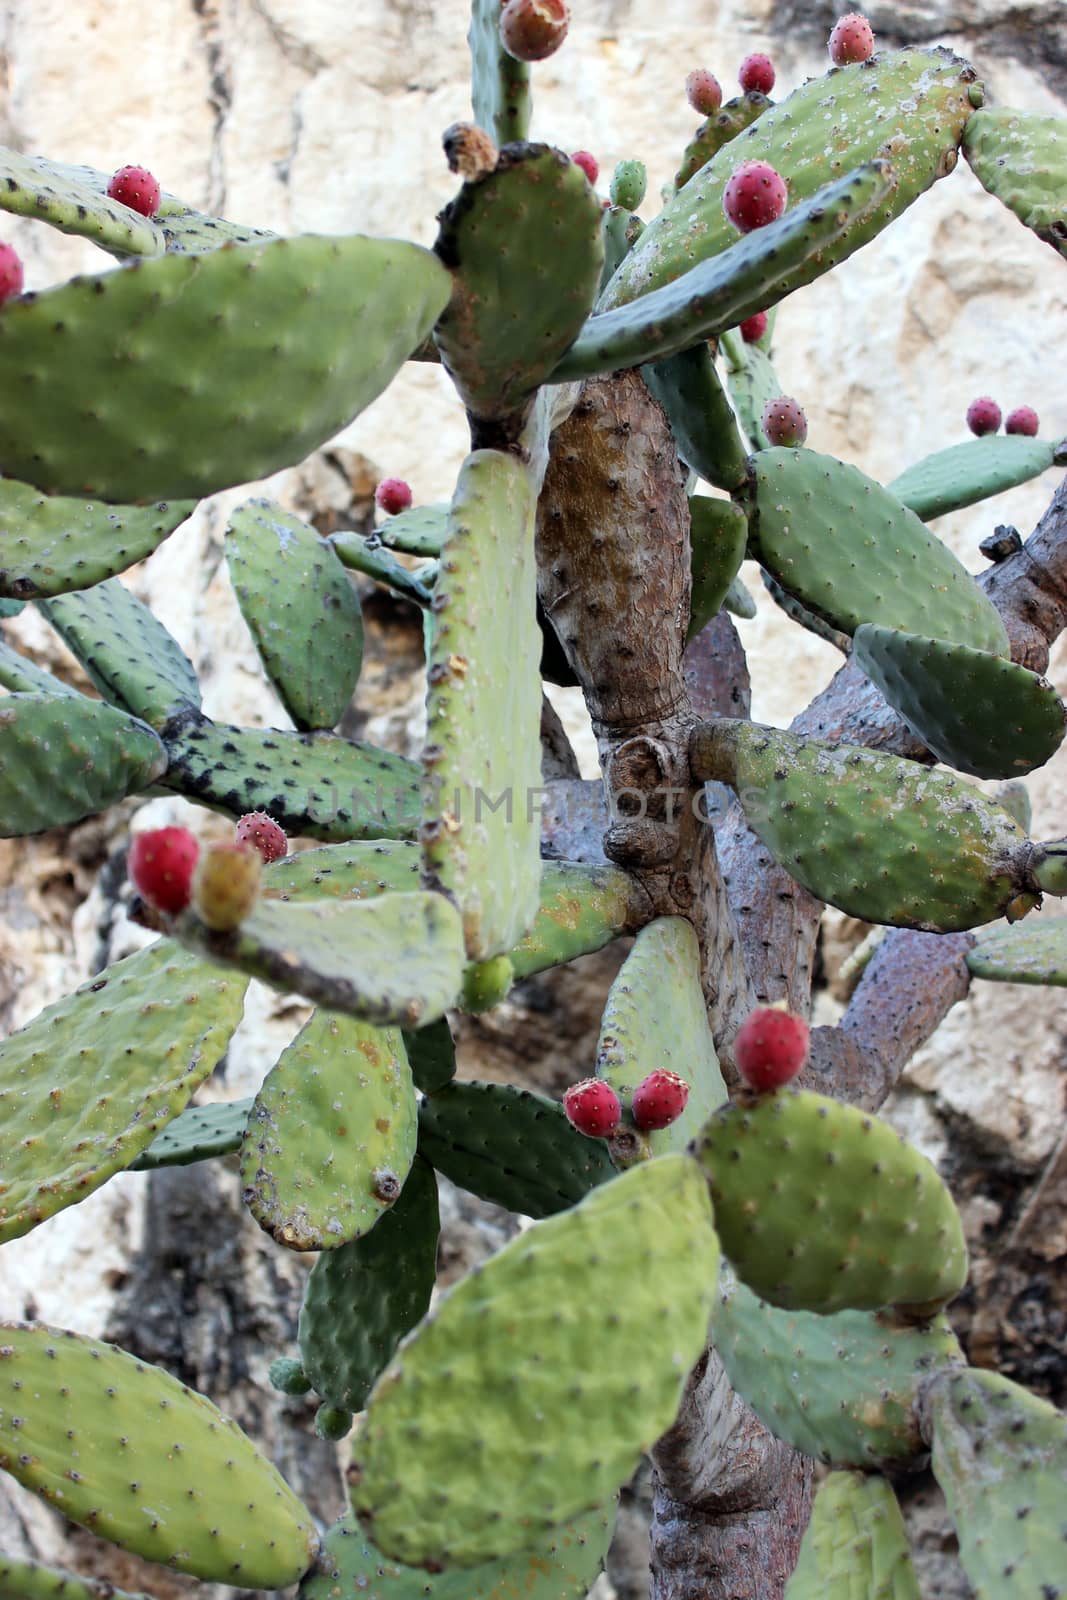 Prickly pear cactus with fruit in red color in Monaco